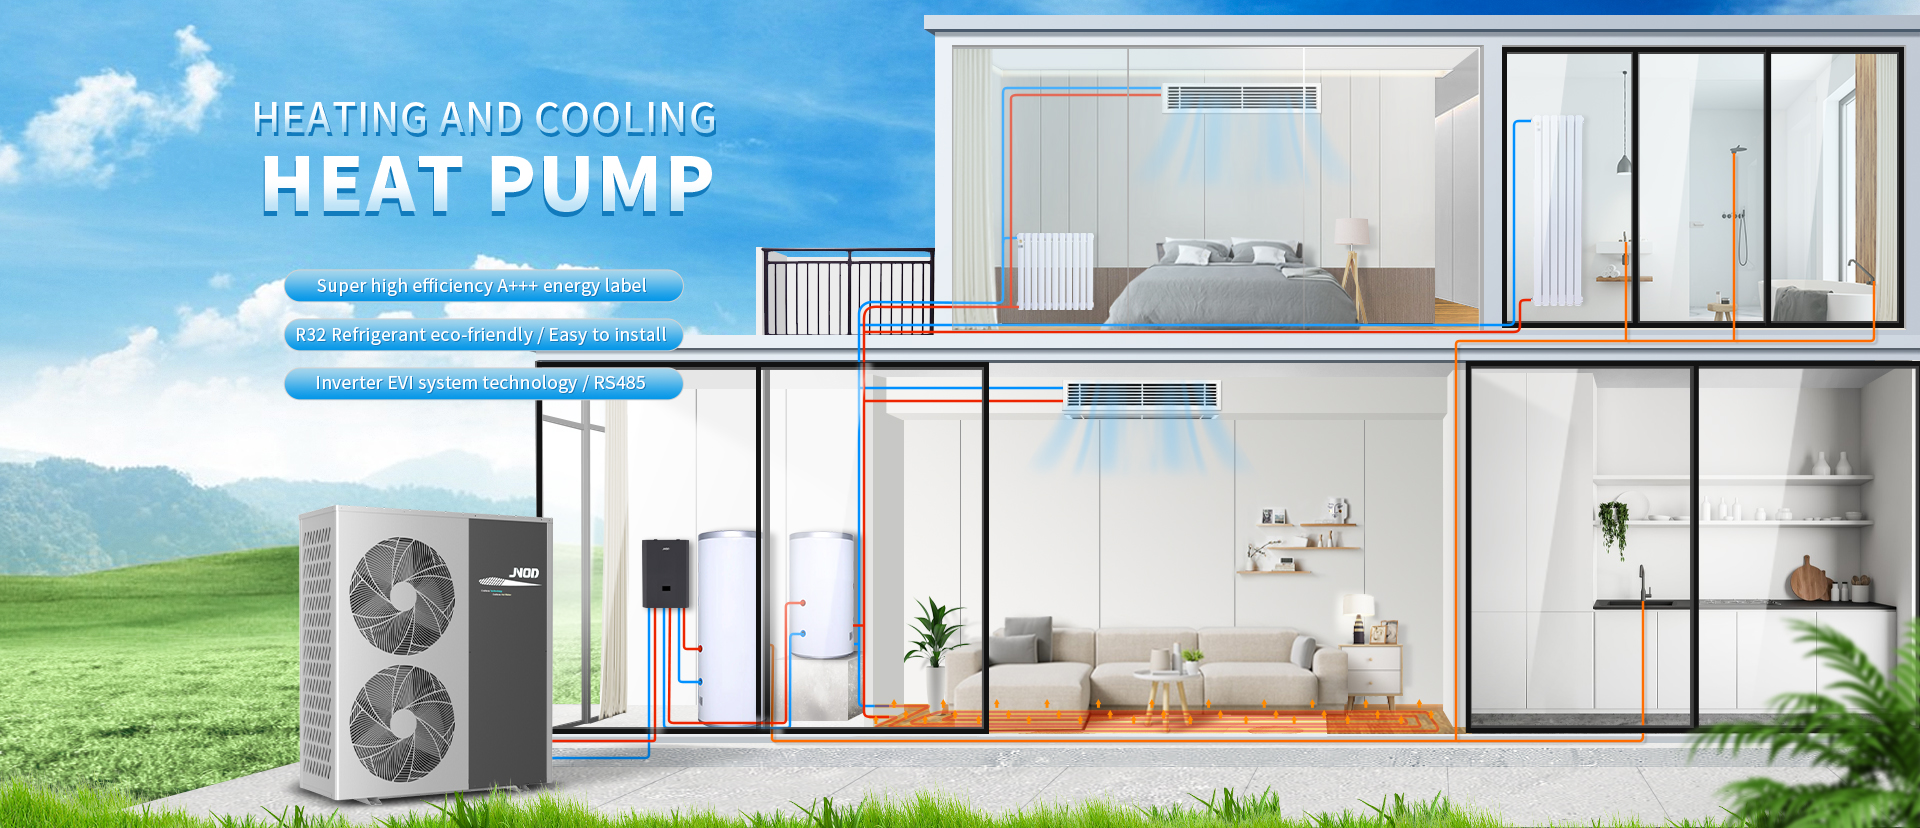 Heating And Cooling Heat Pump For Basement